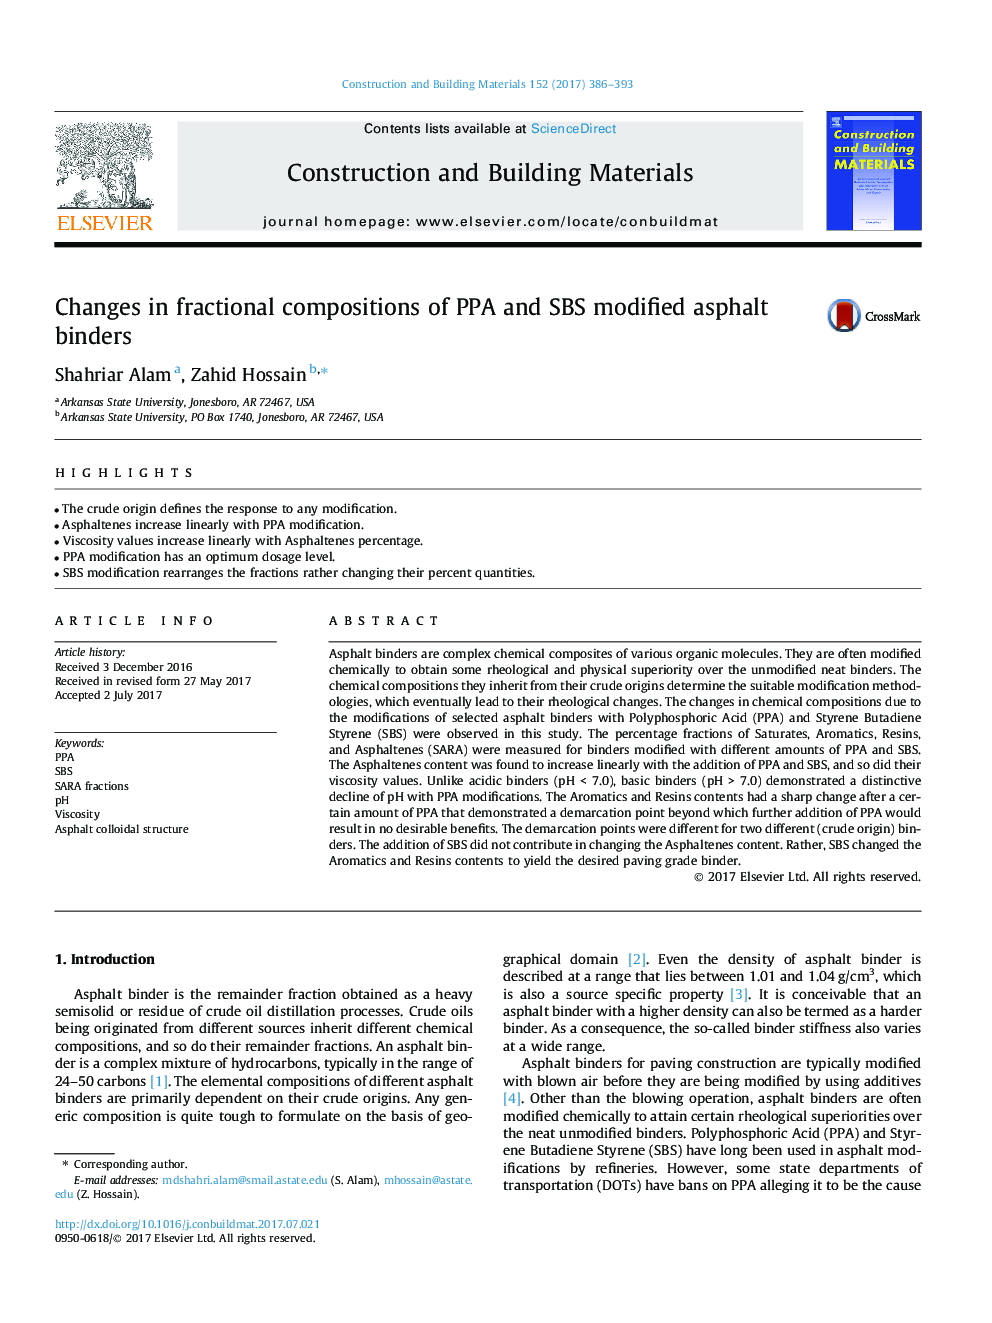 Changes in fractional compositions of PPA and SBS modified asphalt binders